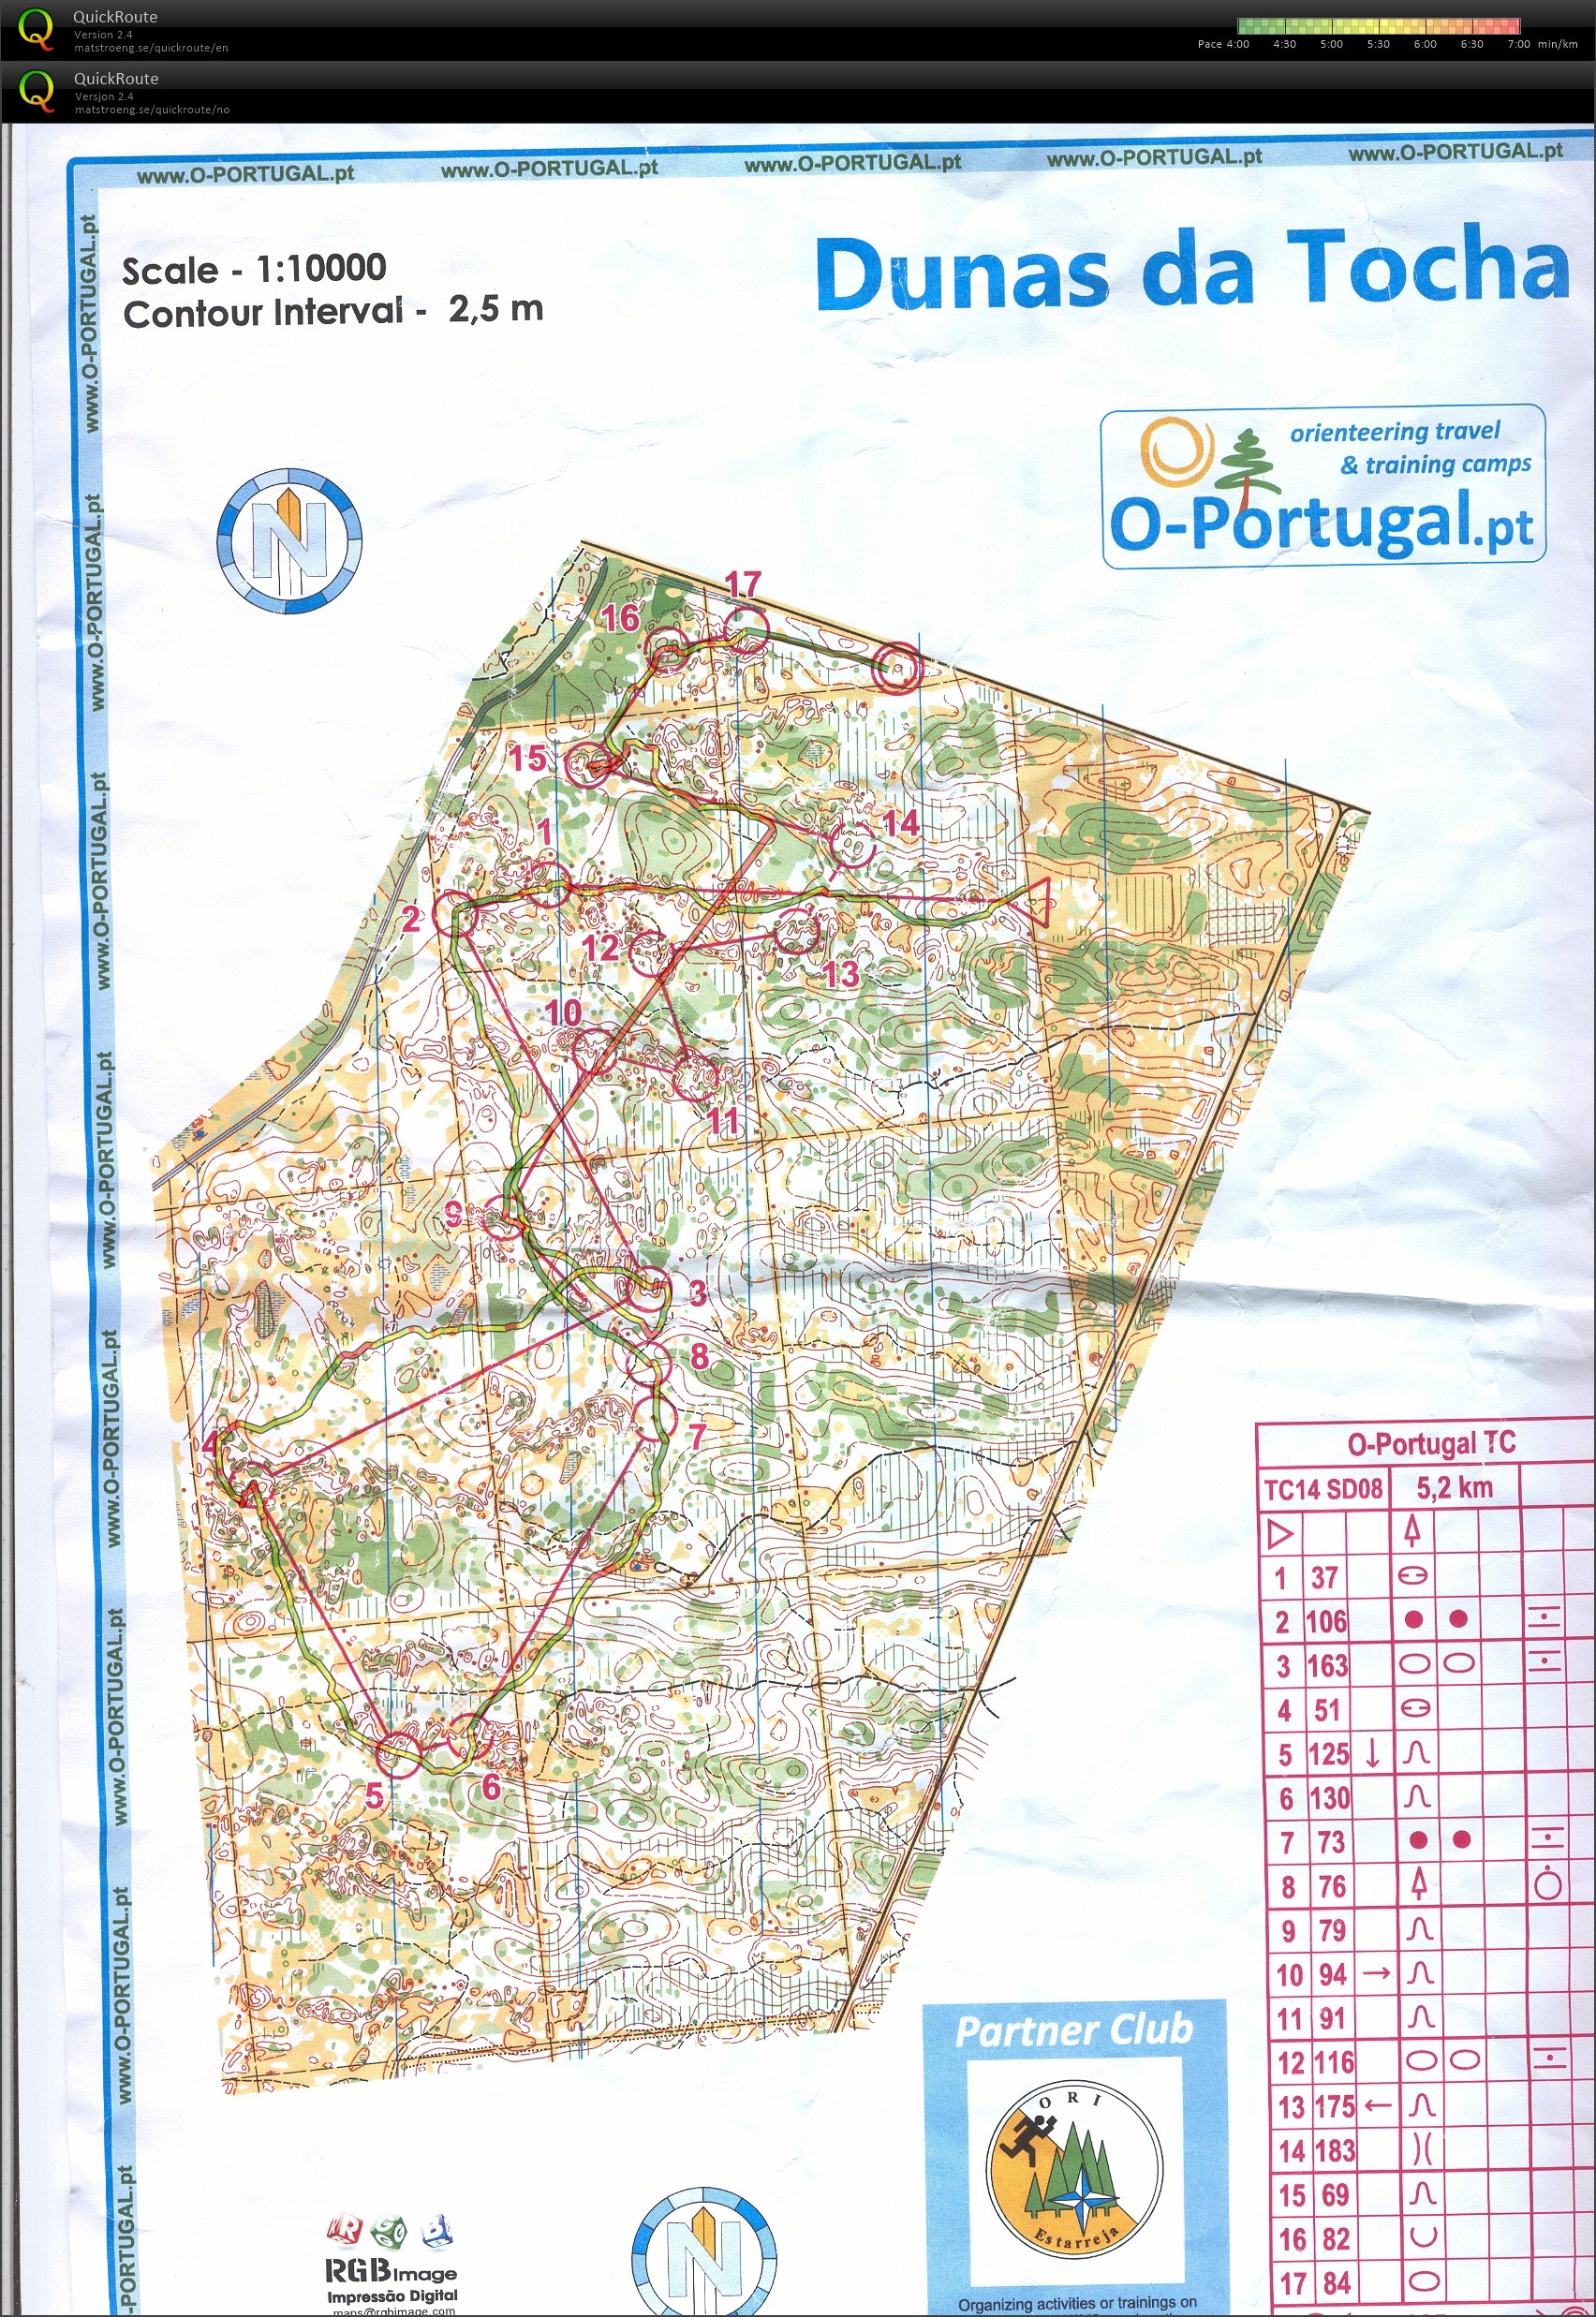 Portugal pass 7 (19.02.2014)